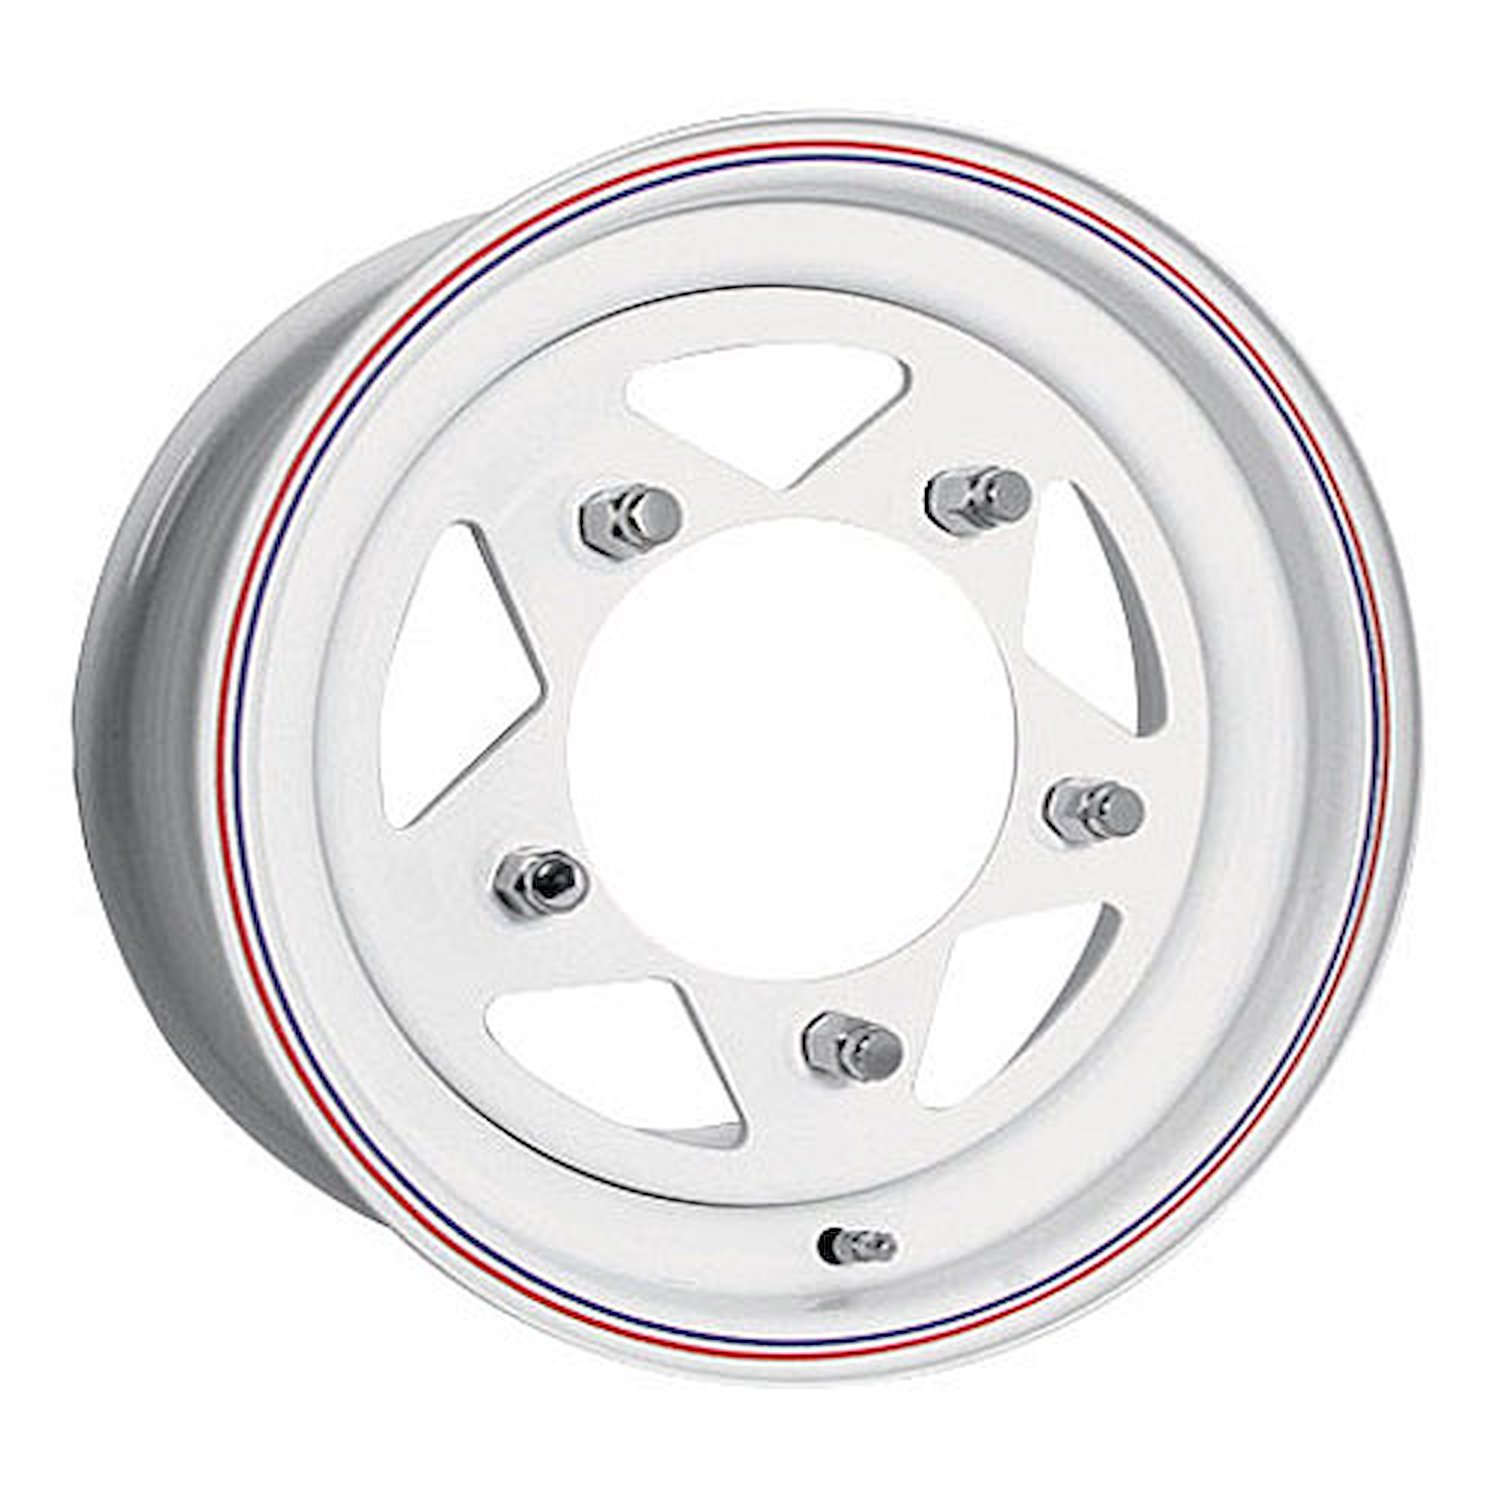 WHITE BAJA STAR VW 15 x 5 5 x 205 Bolt Circle 35 Back Spacing +13 offset 160 Center Bore 1100 lbs Load Rating